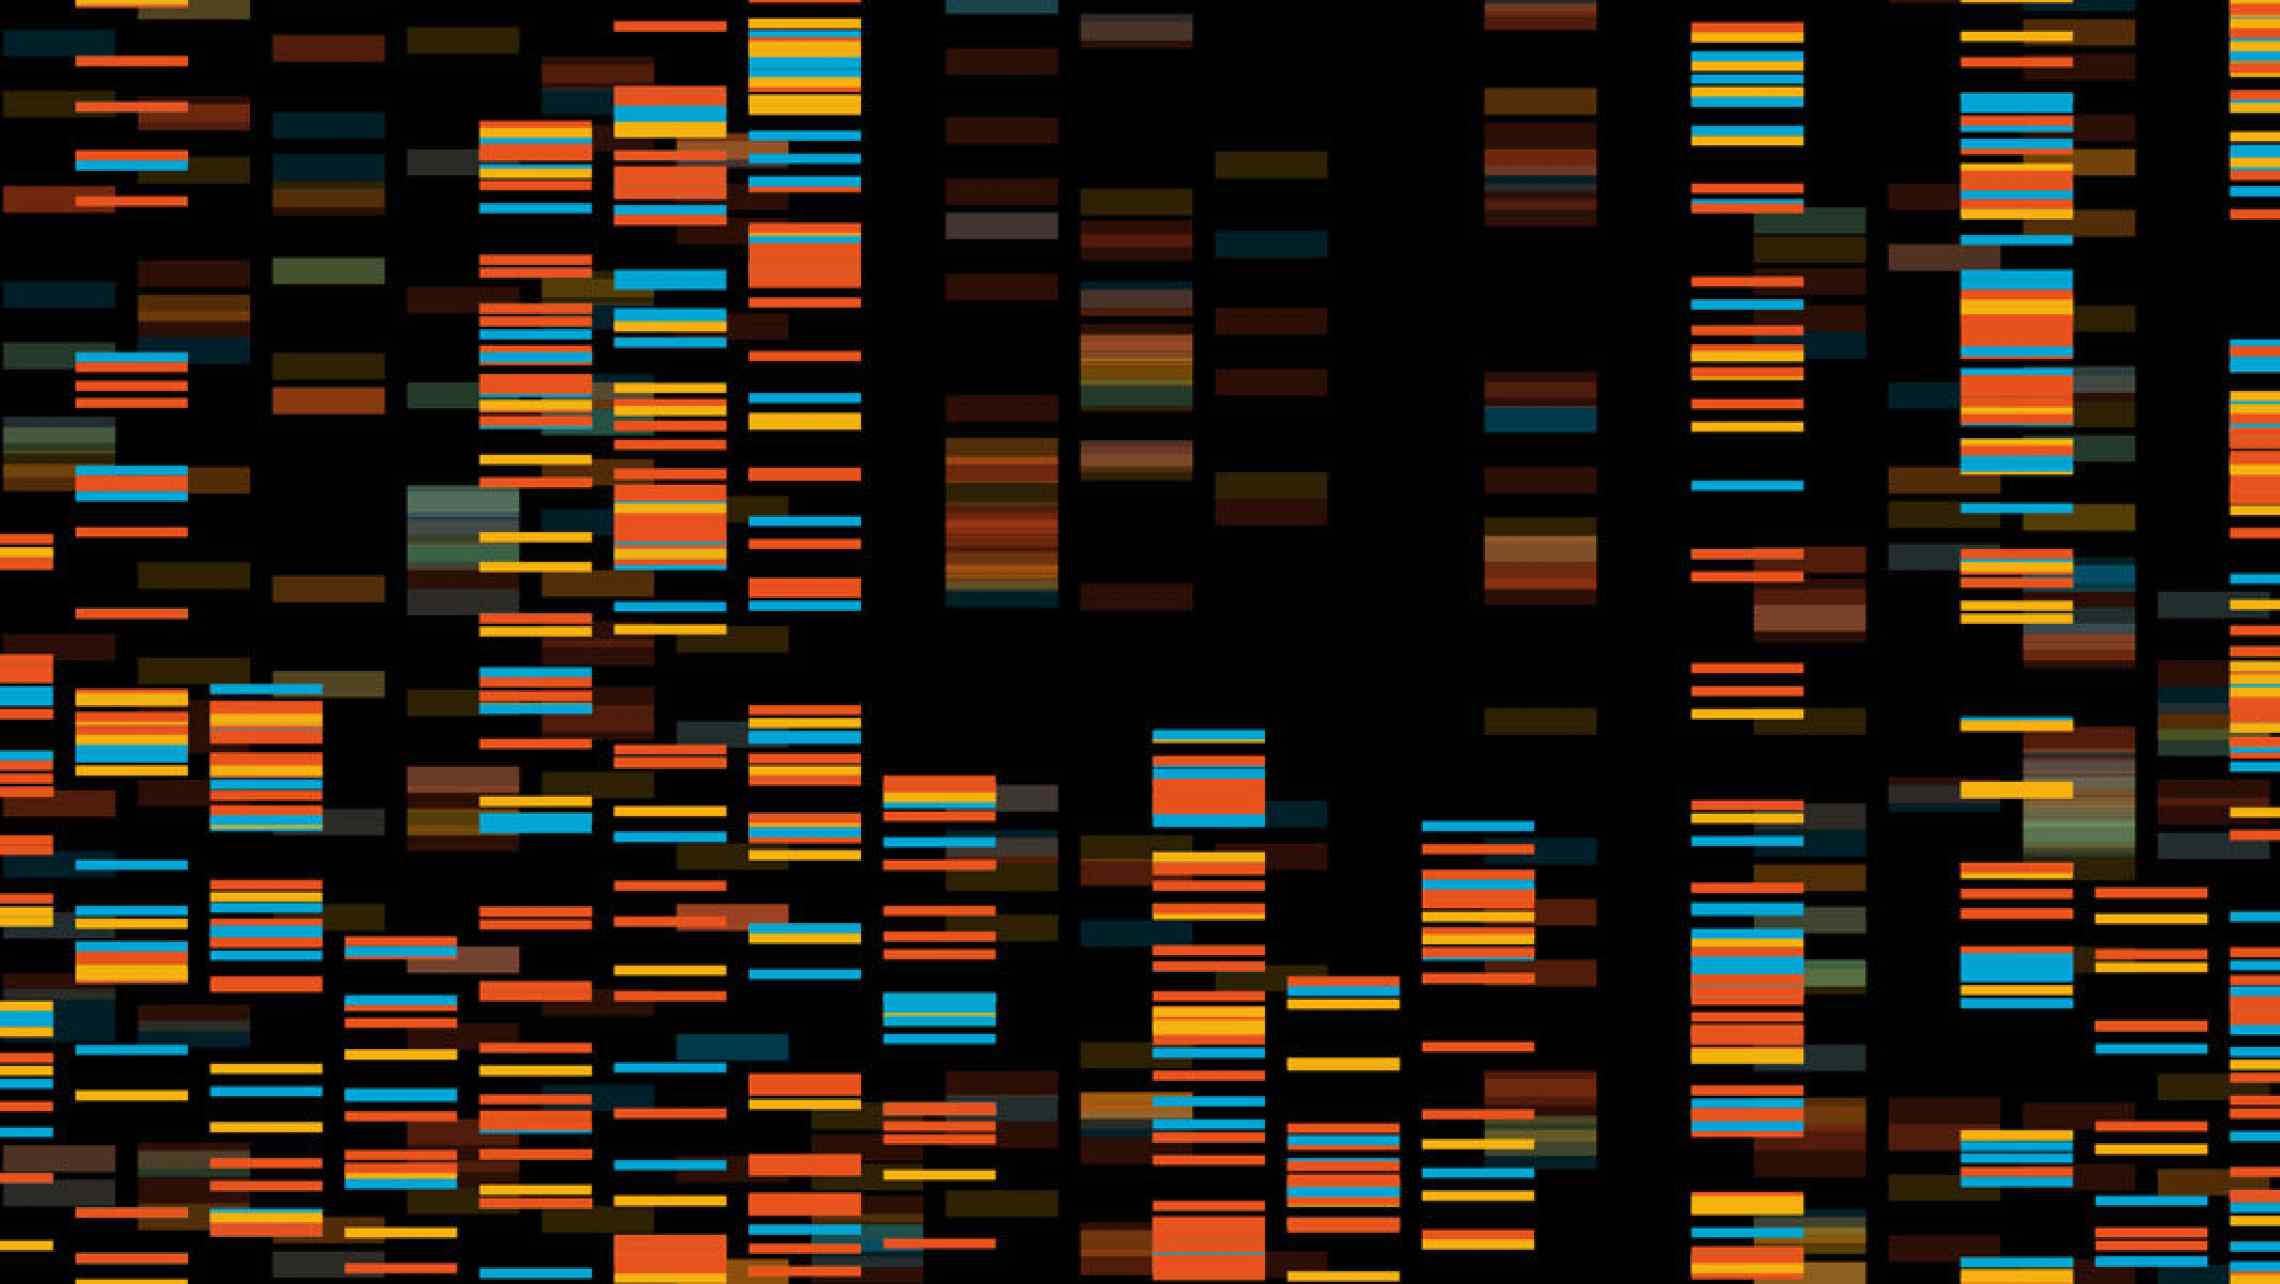 WITH THESE 4 BREAKTHROUGHS, WE’LL BE ABLE TO WRITE WHOLE GENOMES FROM SCRATCH